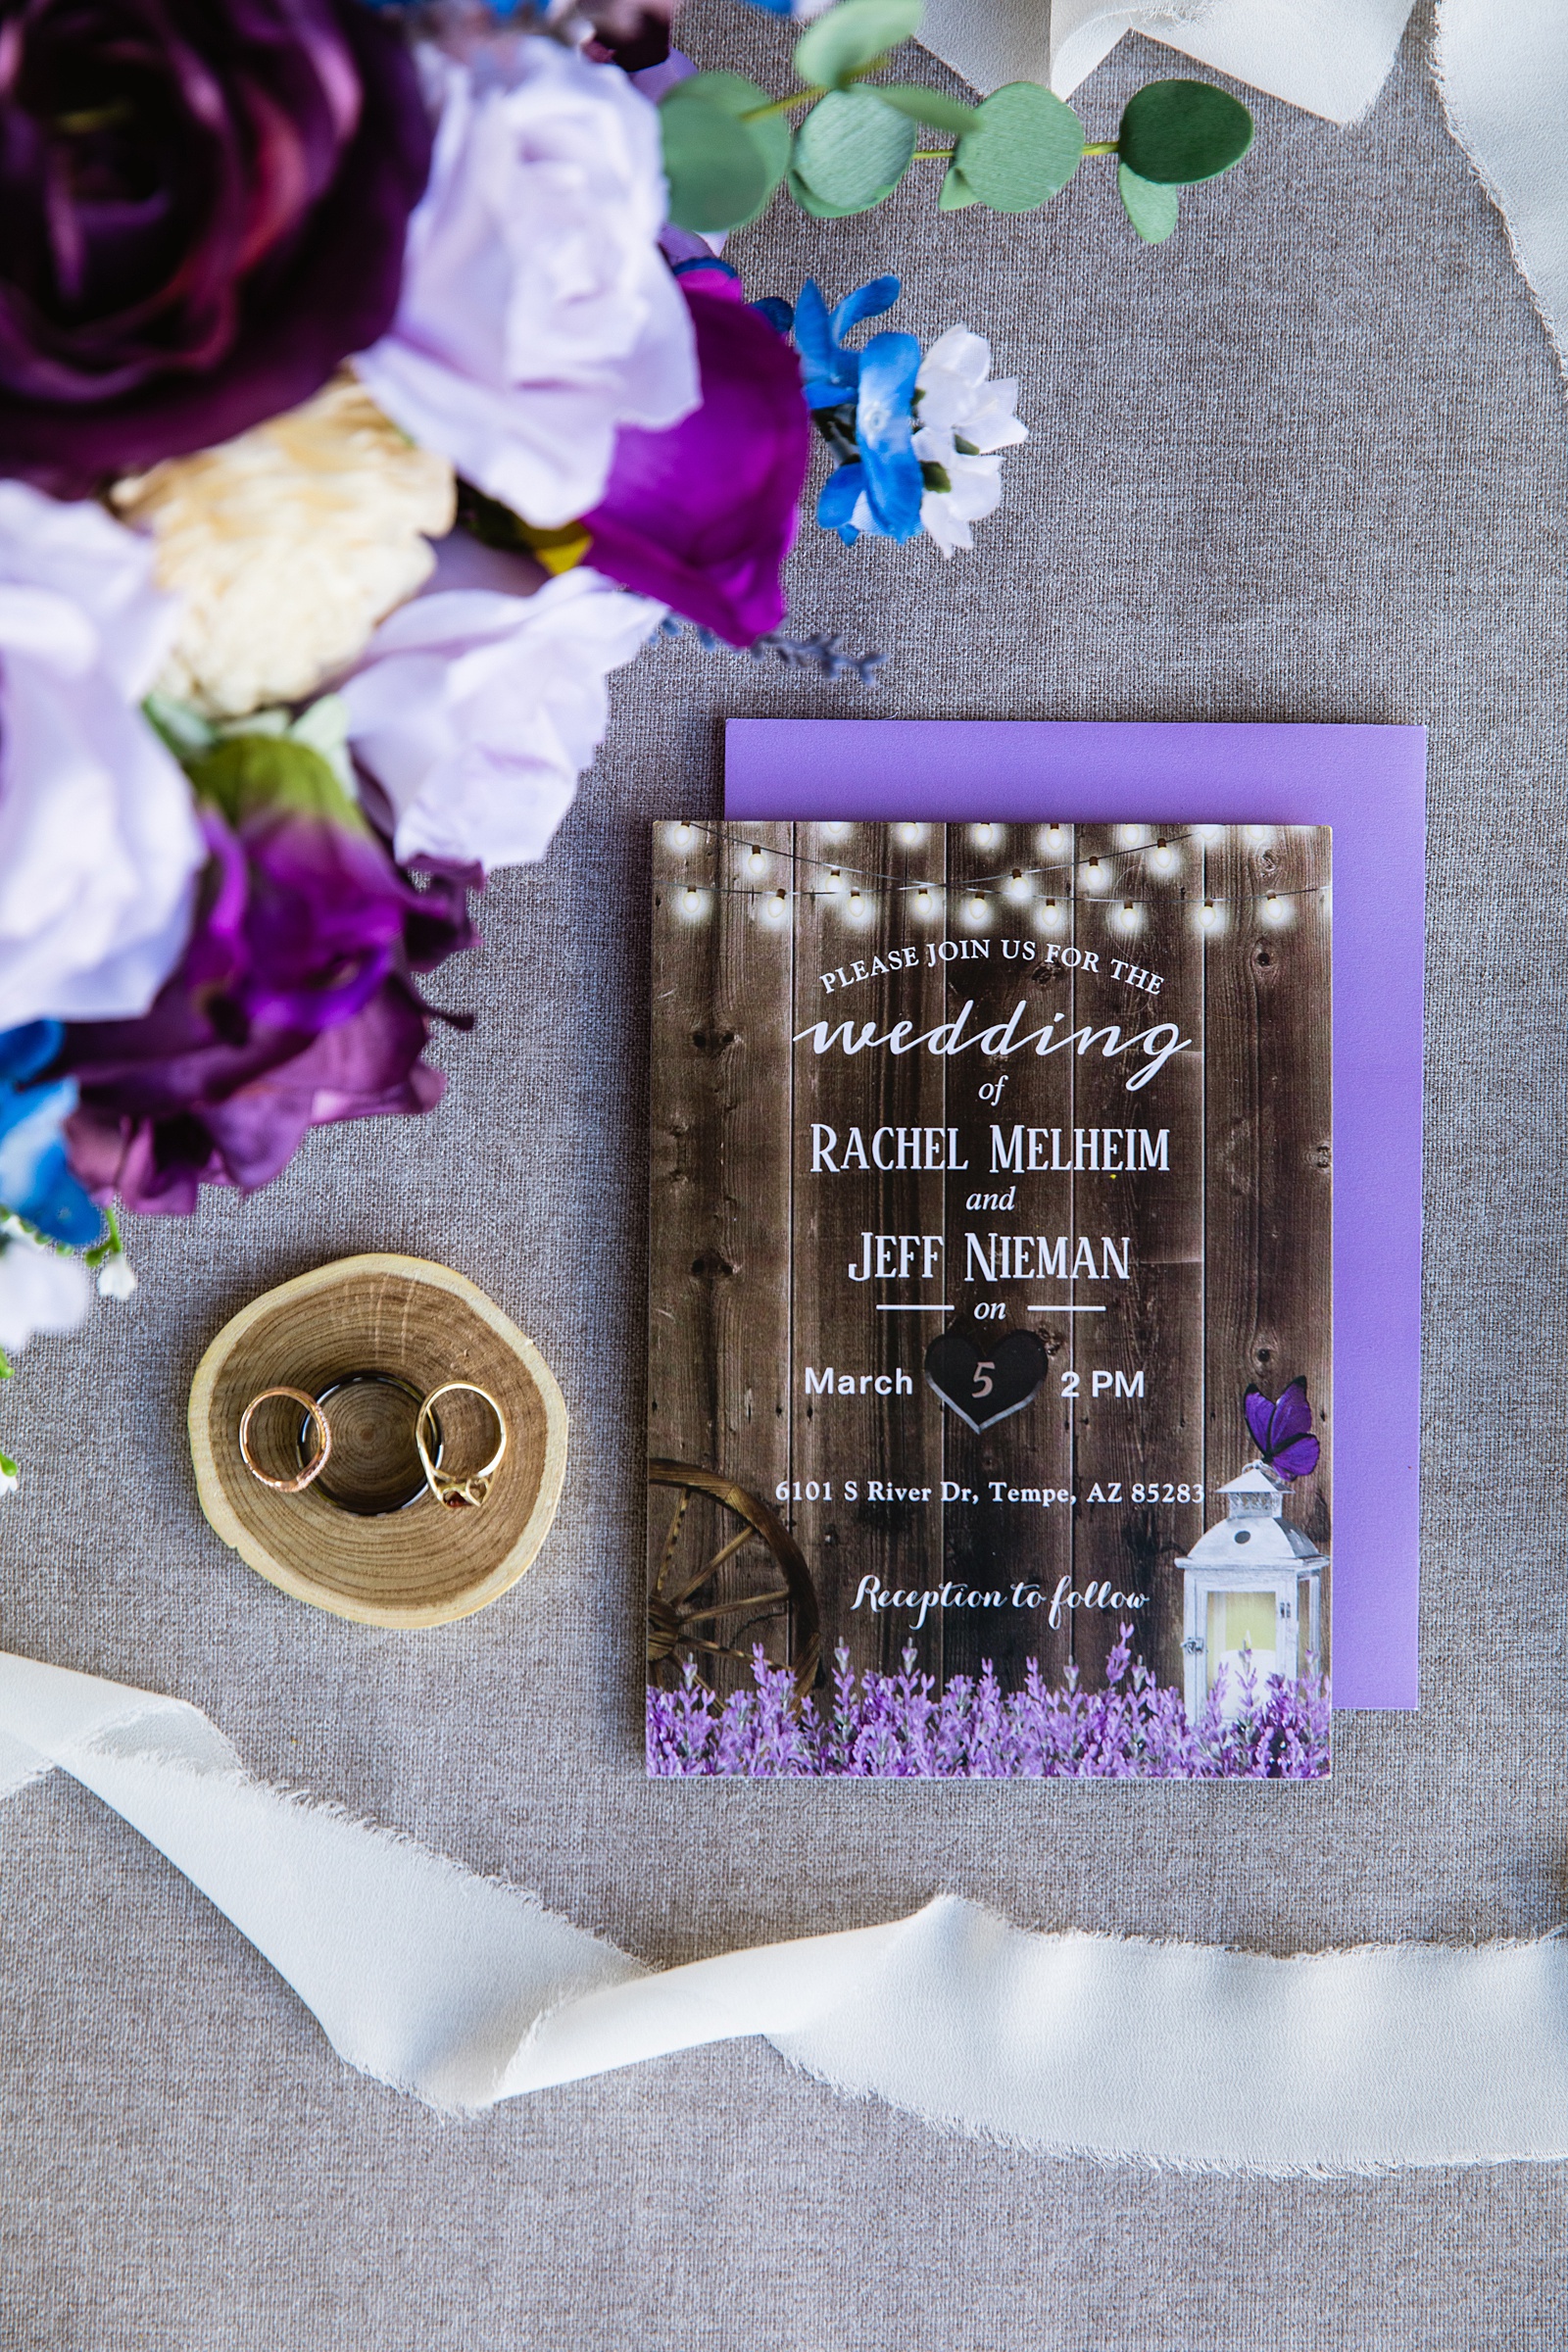 Bride and groom's wedding rings on top of a rustic and purple wedding invitations by PMA Photography.